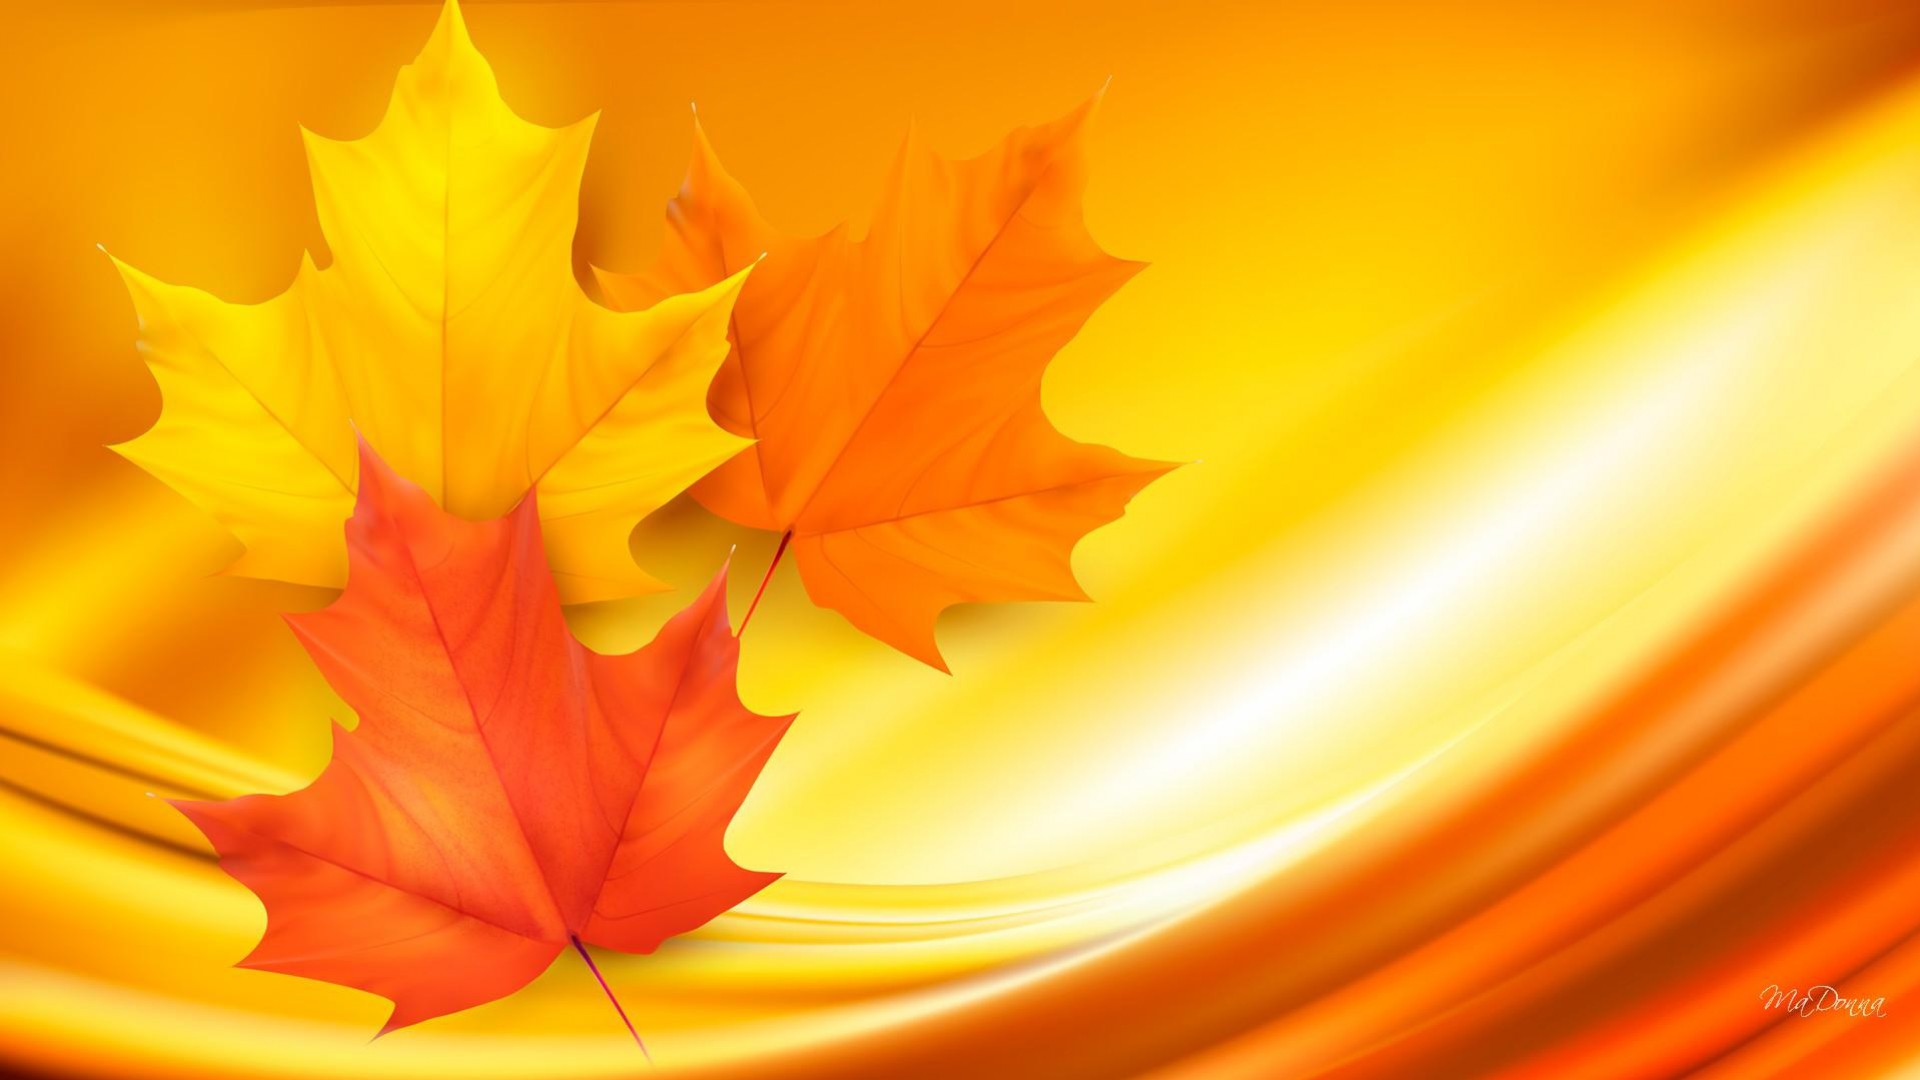 Maple Leaf - Desktop Wallpapers, Phone Wallpaper, PFP, Gifs, and More!